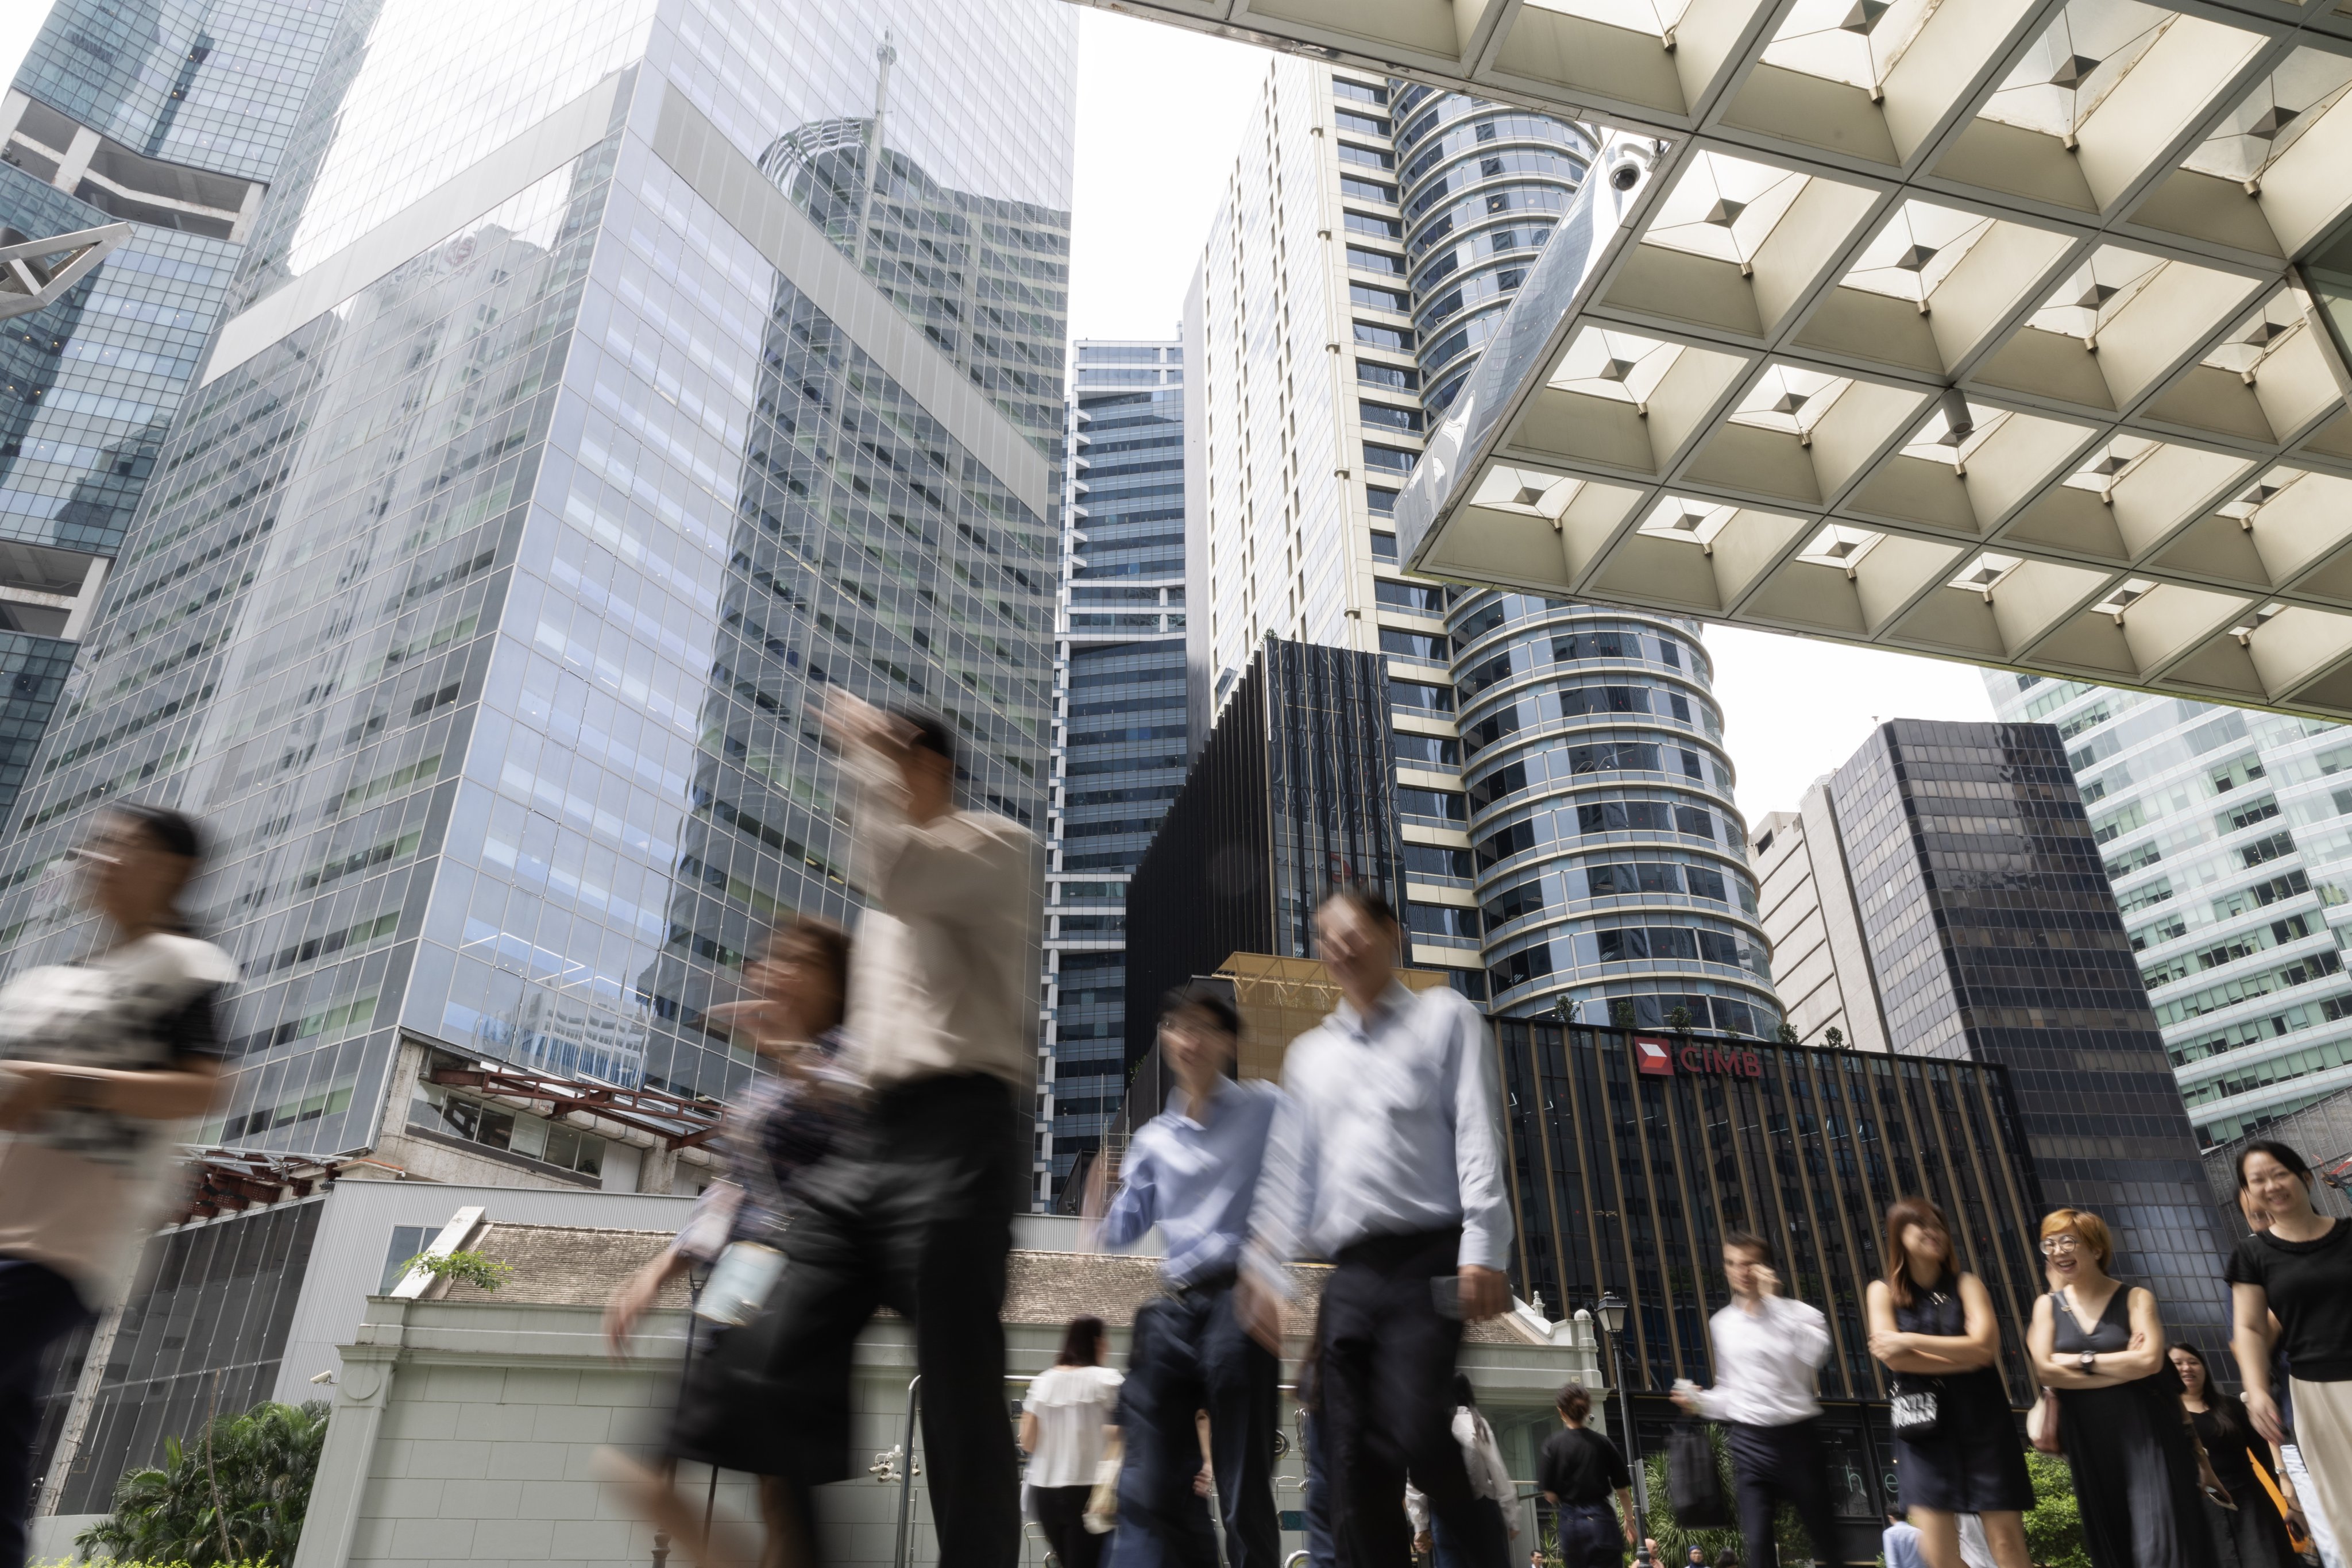 People walk in Singapore’s central business district. About 1.77 million of the city state’s 5.92 million people are foreign workers, their dependants, international students and other non-residents. Photo: EPA-EFE